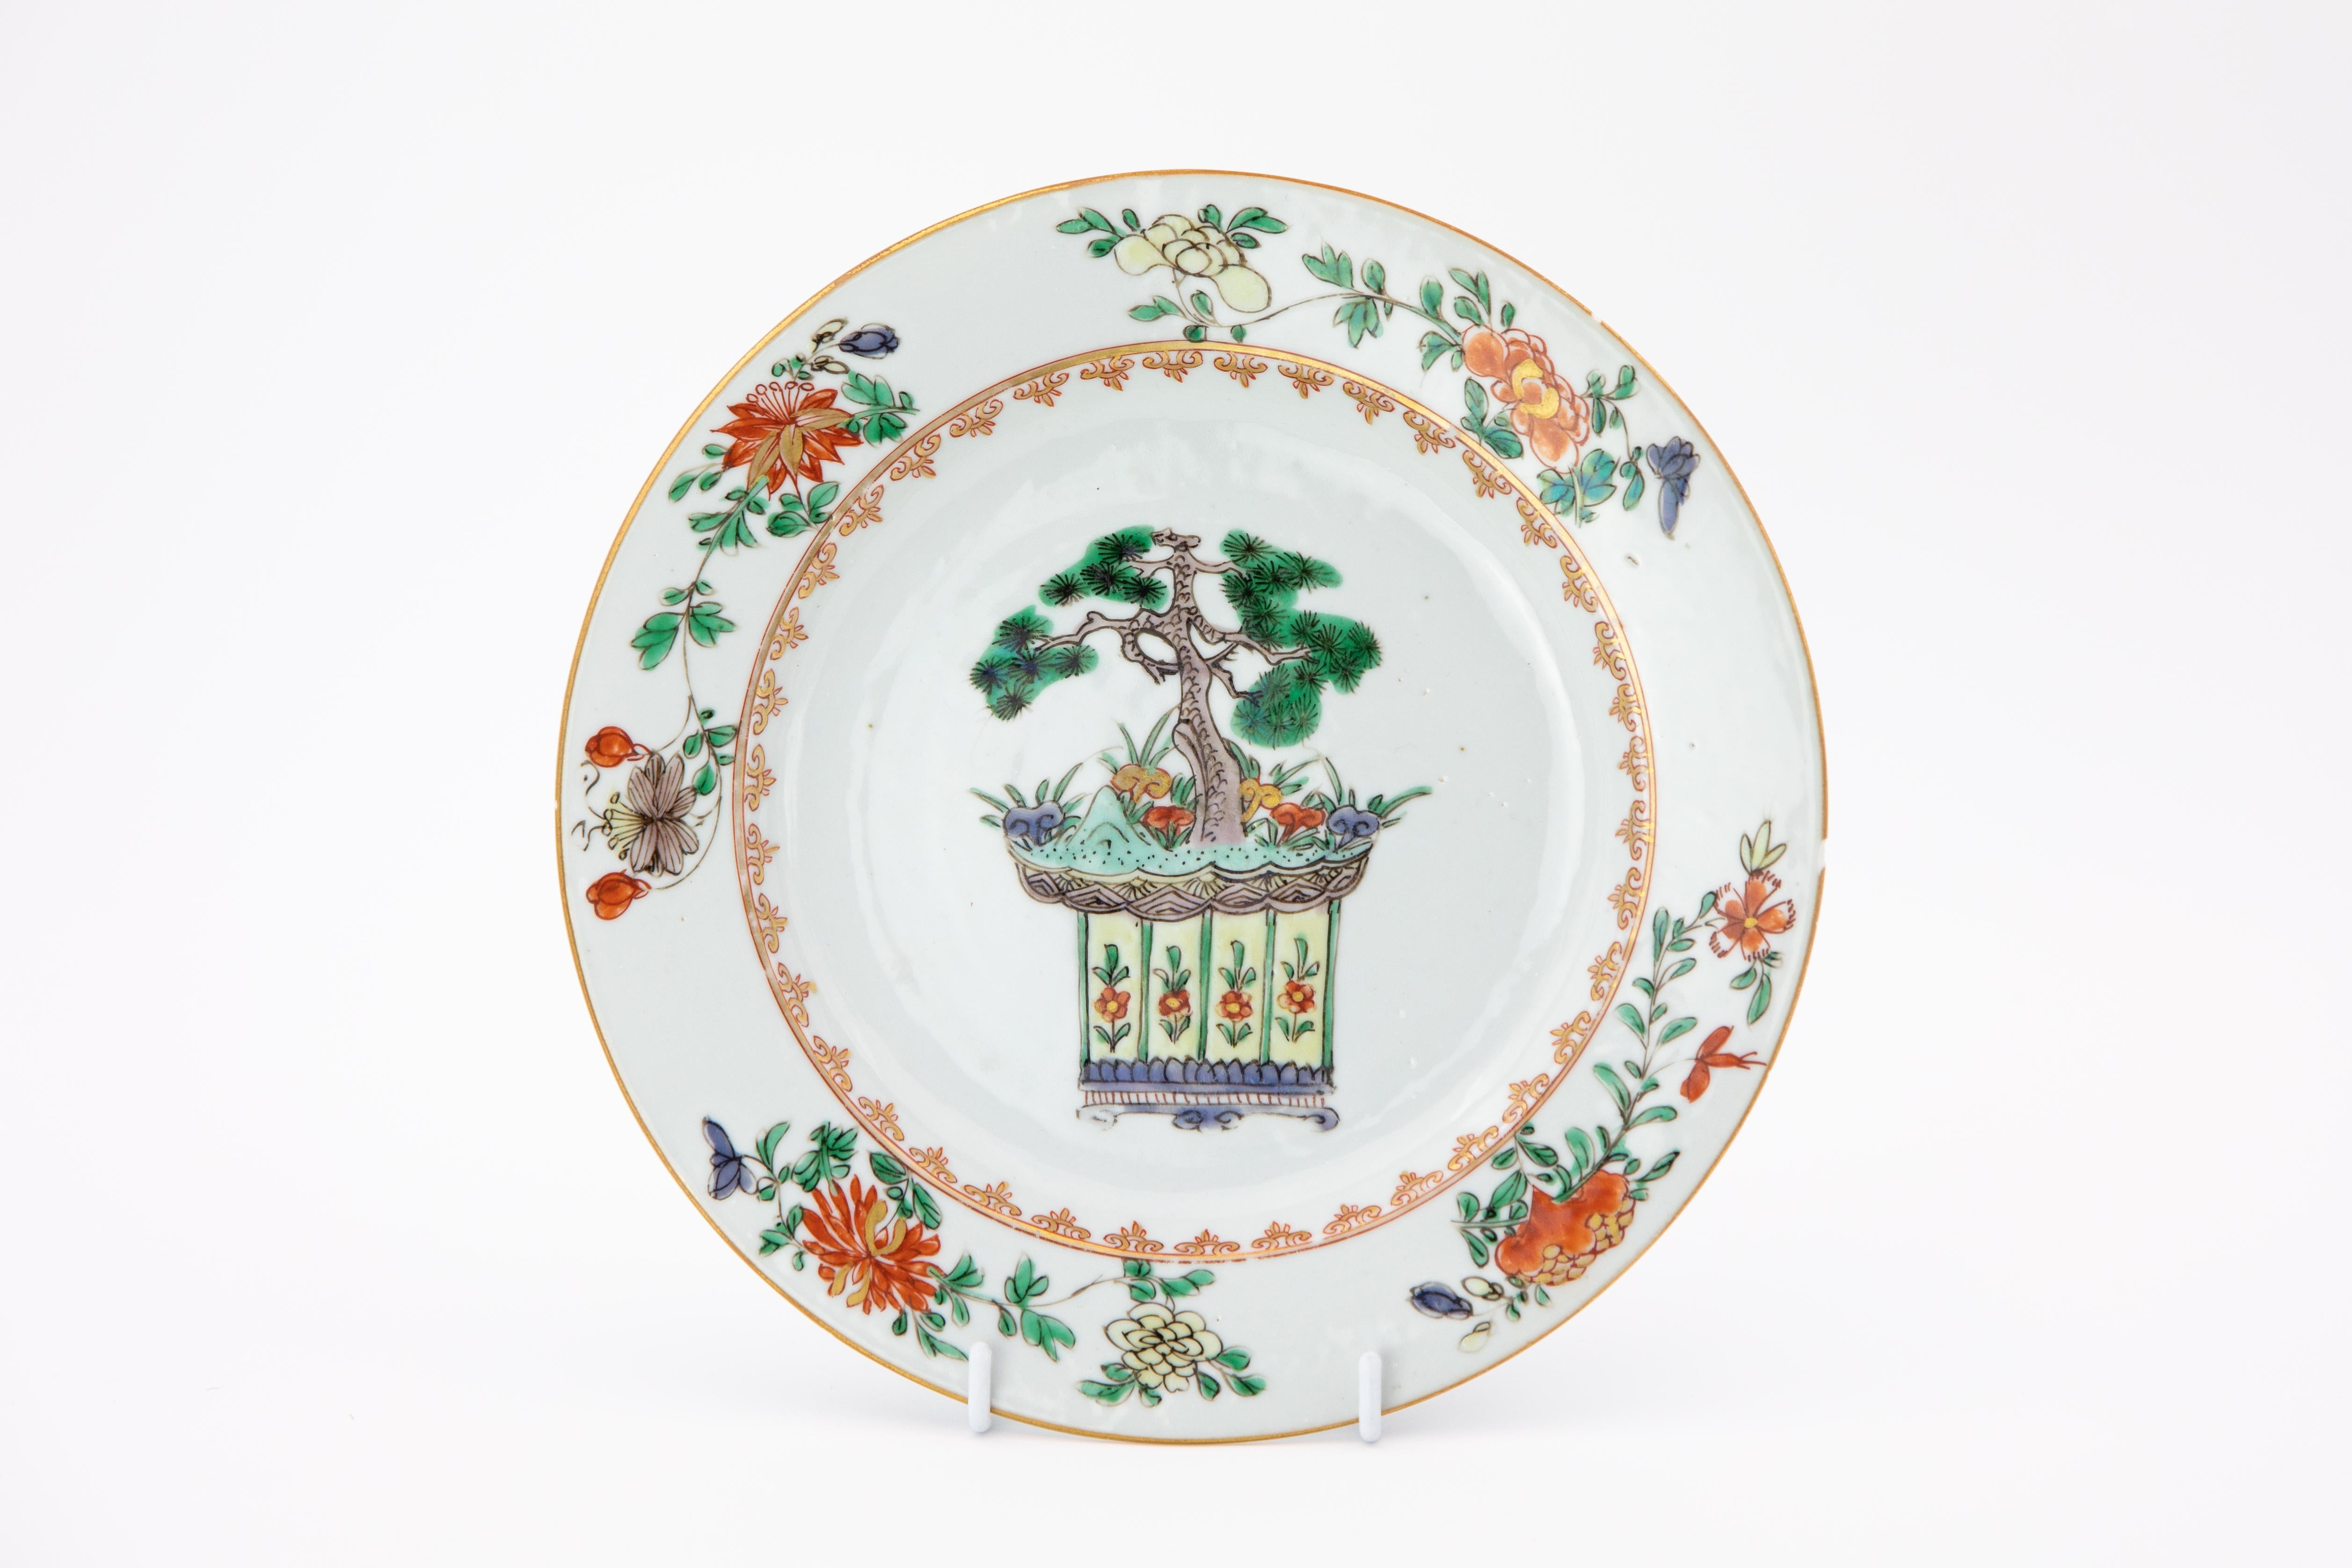 A pair of famille verte porcelain plates, the left made in China during the Kangxi period (r. 1662–1722) and the right a copy by Meissen made circa 1740.

Chinese porcelain has always been the standard which European ceramicists revered and tried